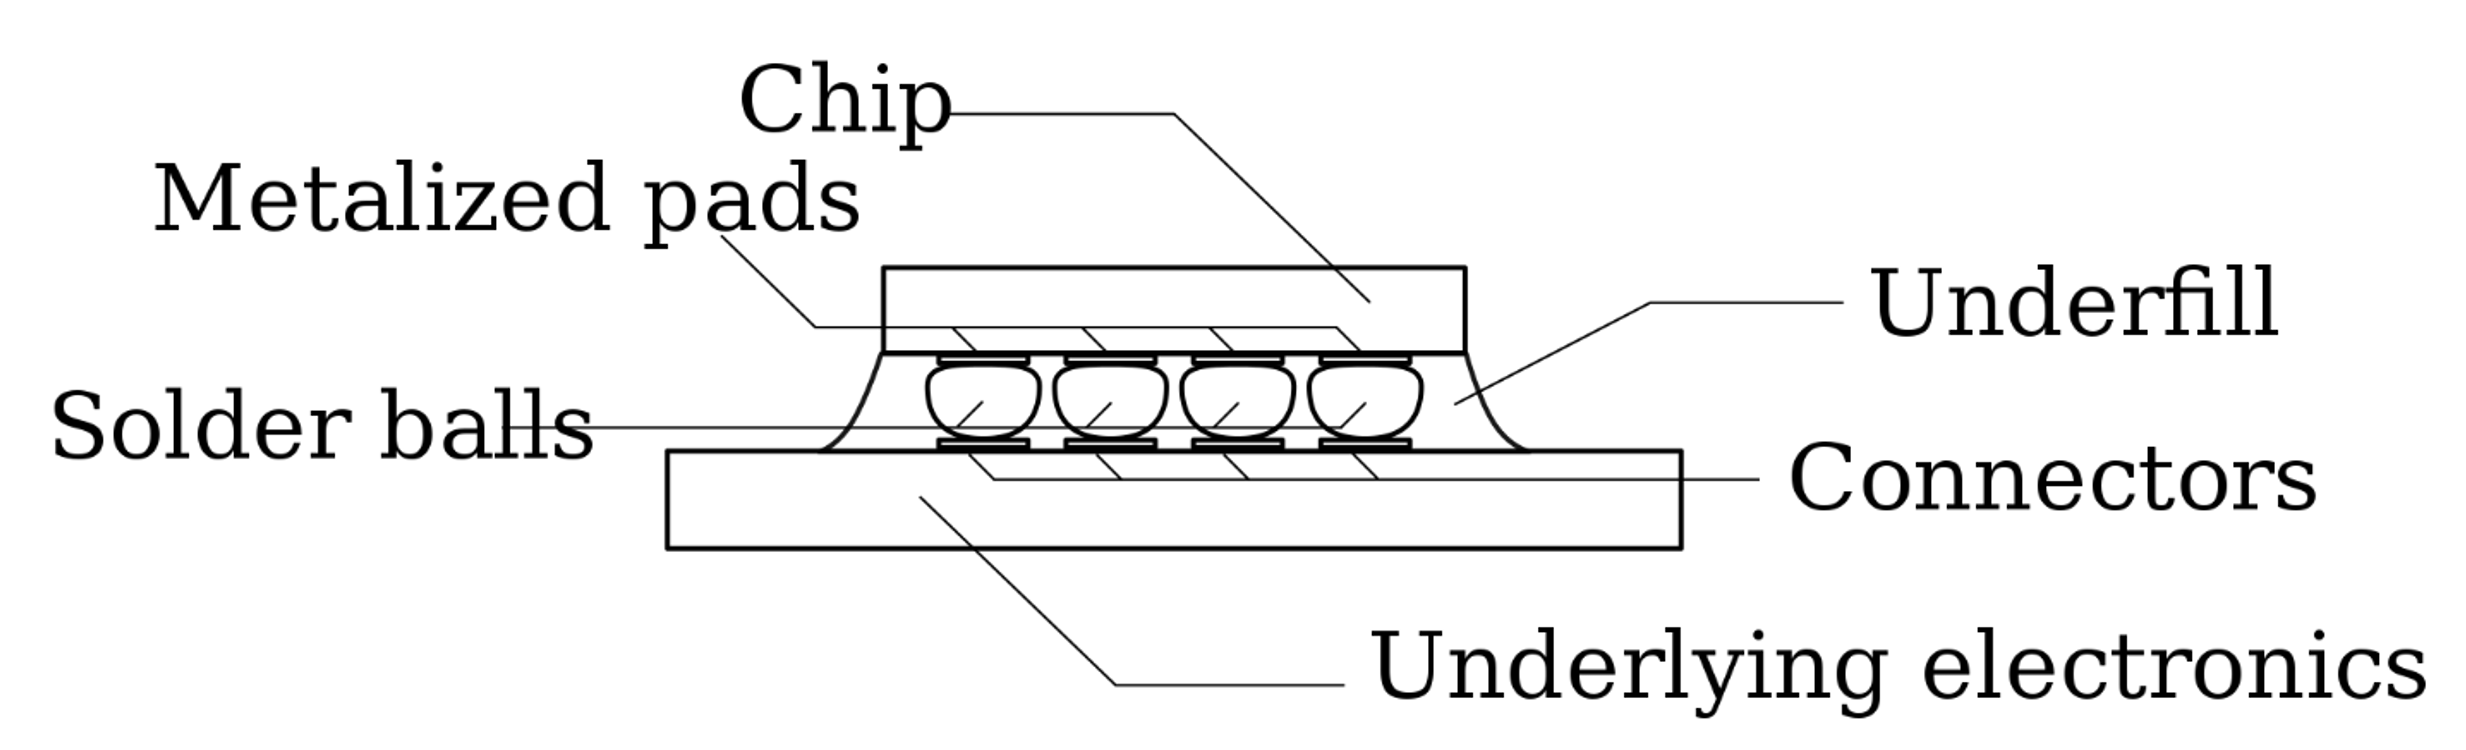 Fig. 2: Flip-chip components. Source: Semiconductor Engineering